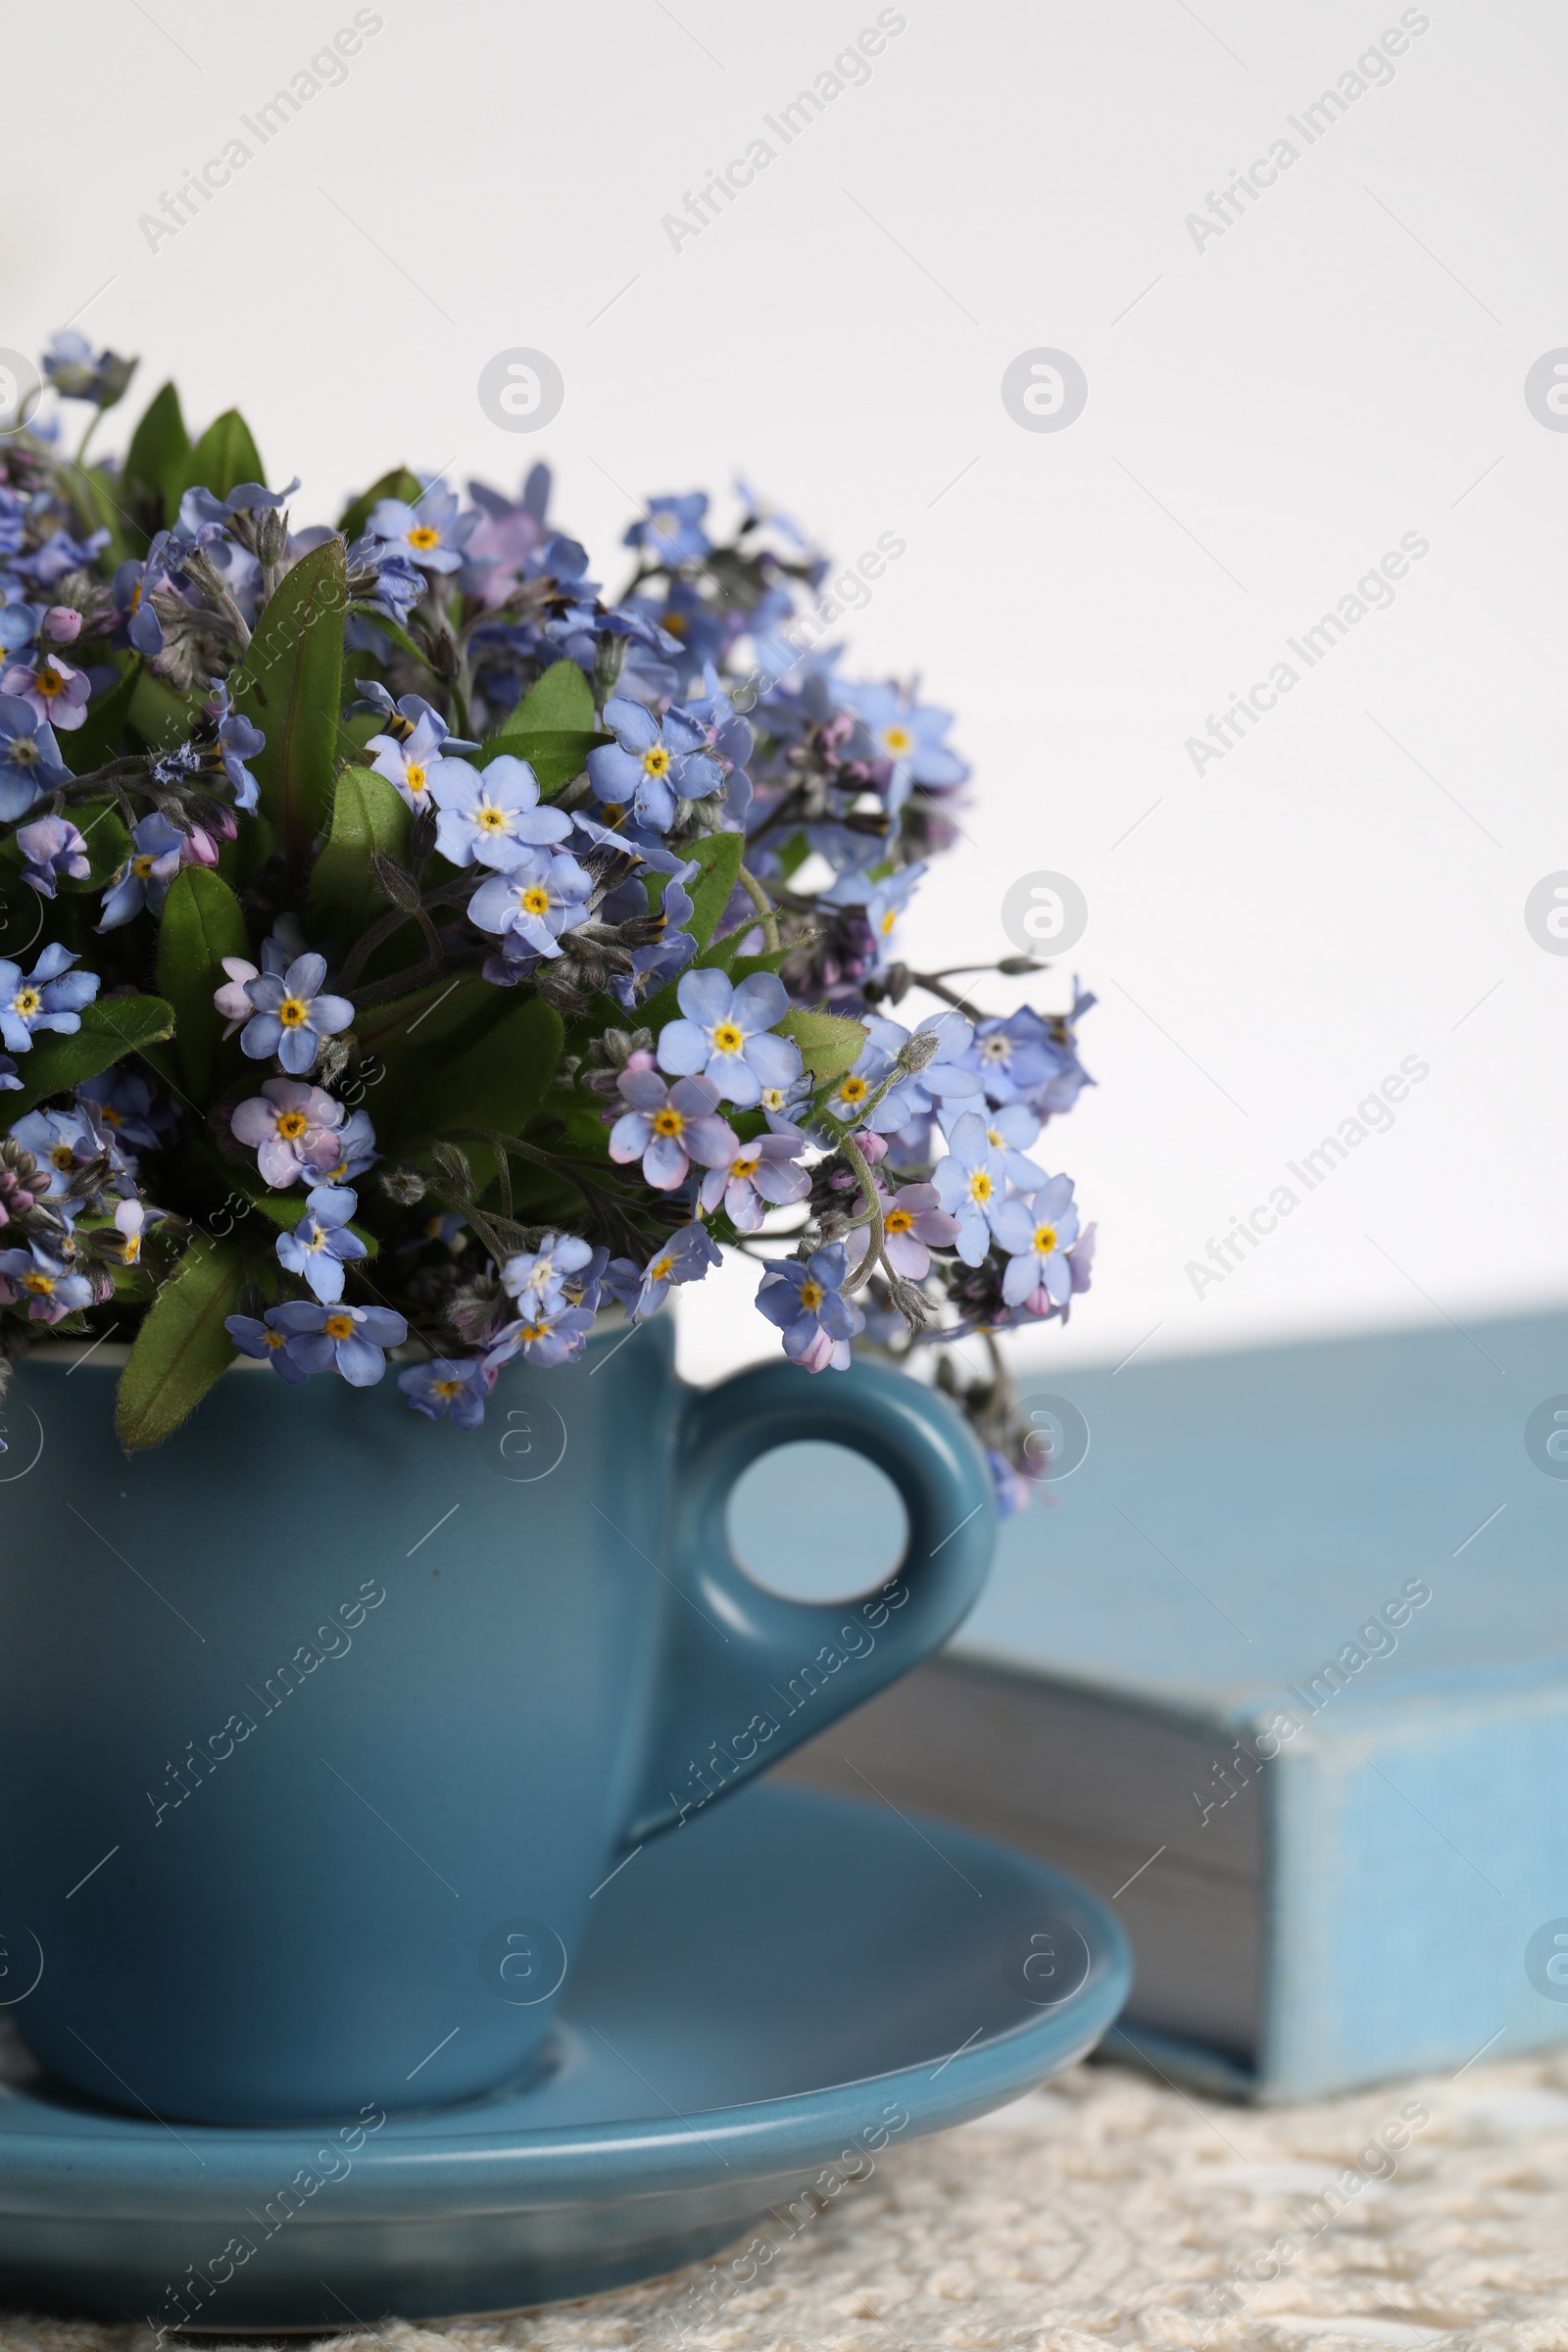 Photo of Beautiful forget-me-not flowers in cup, book and crochet tablecloth on table against white background, closeup